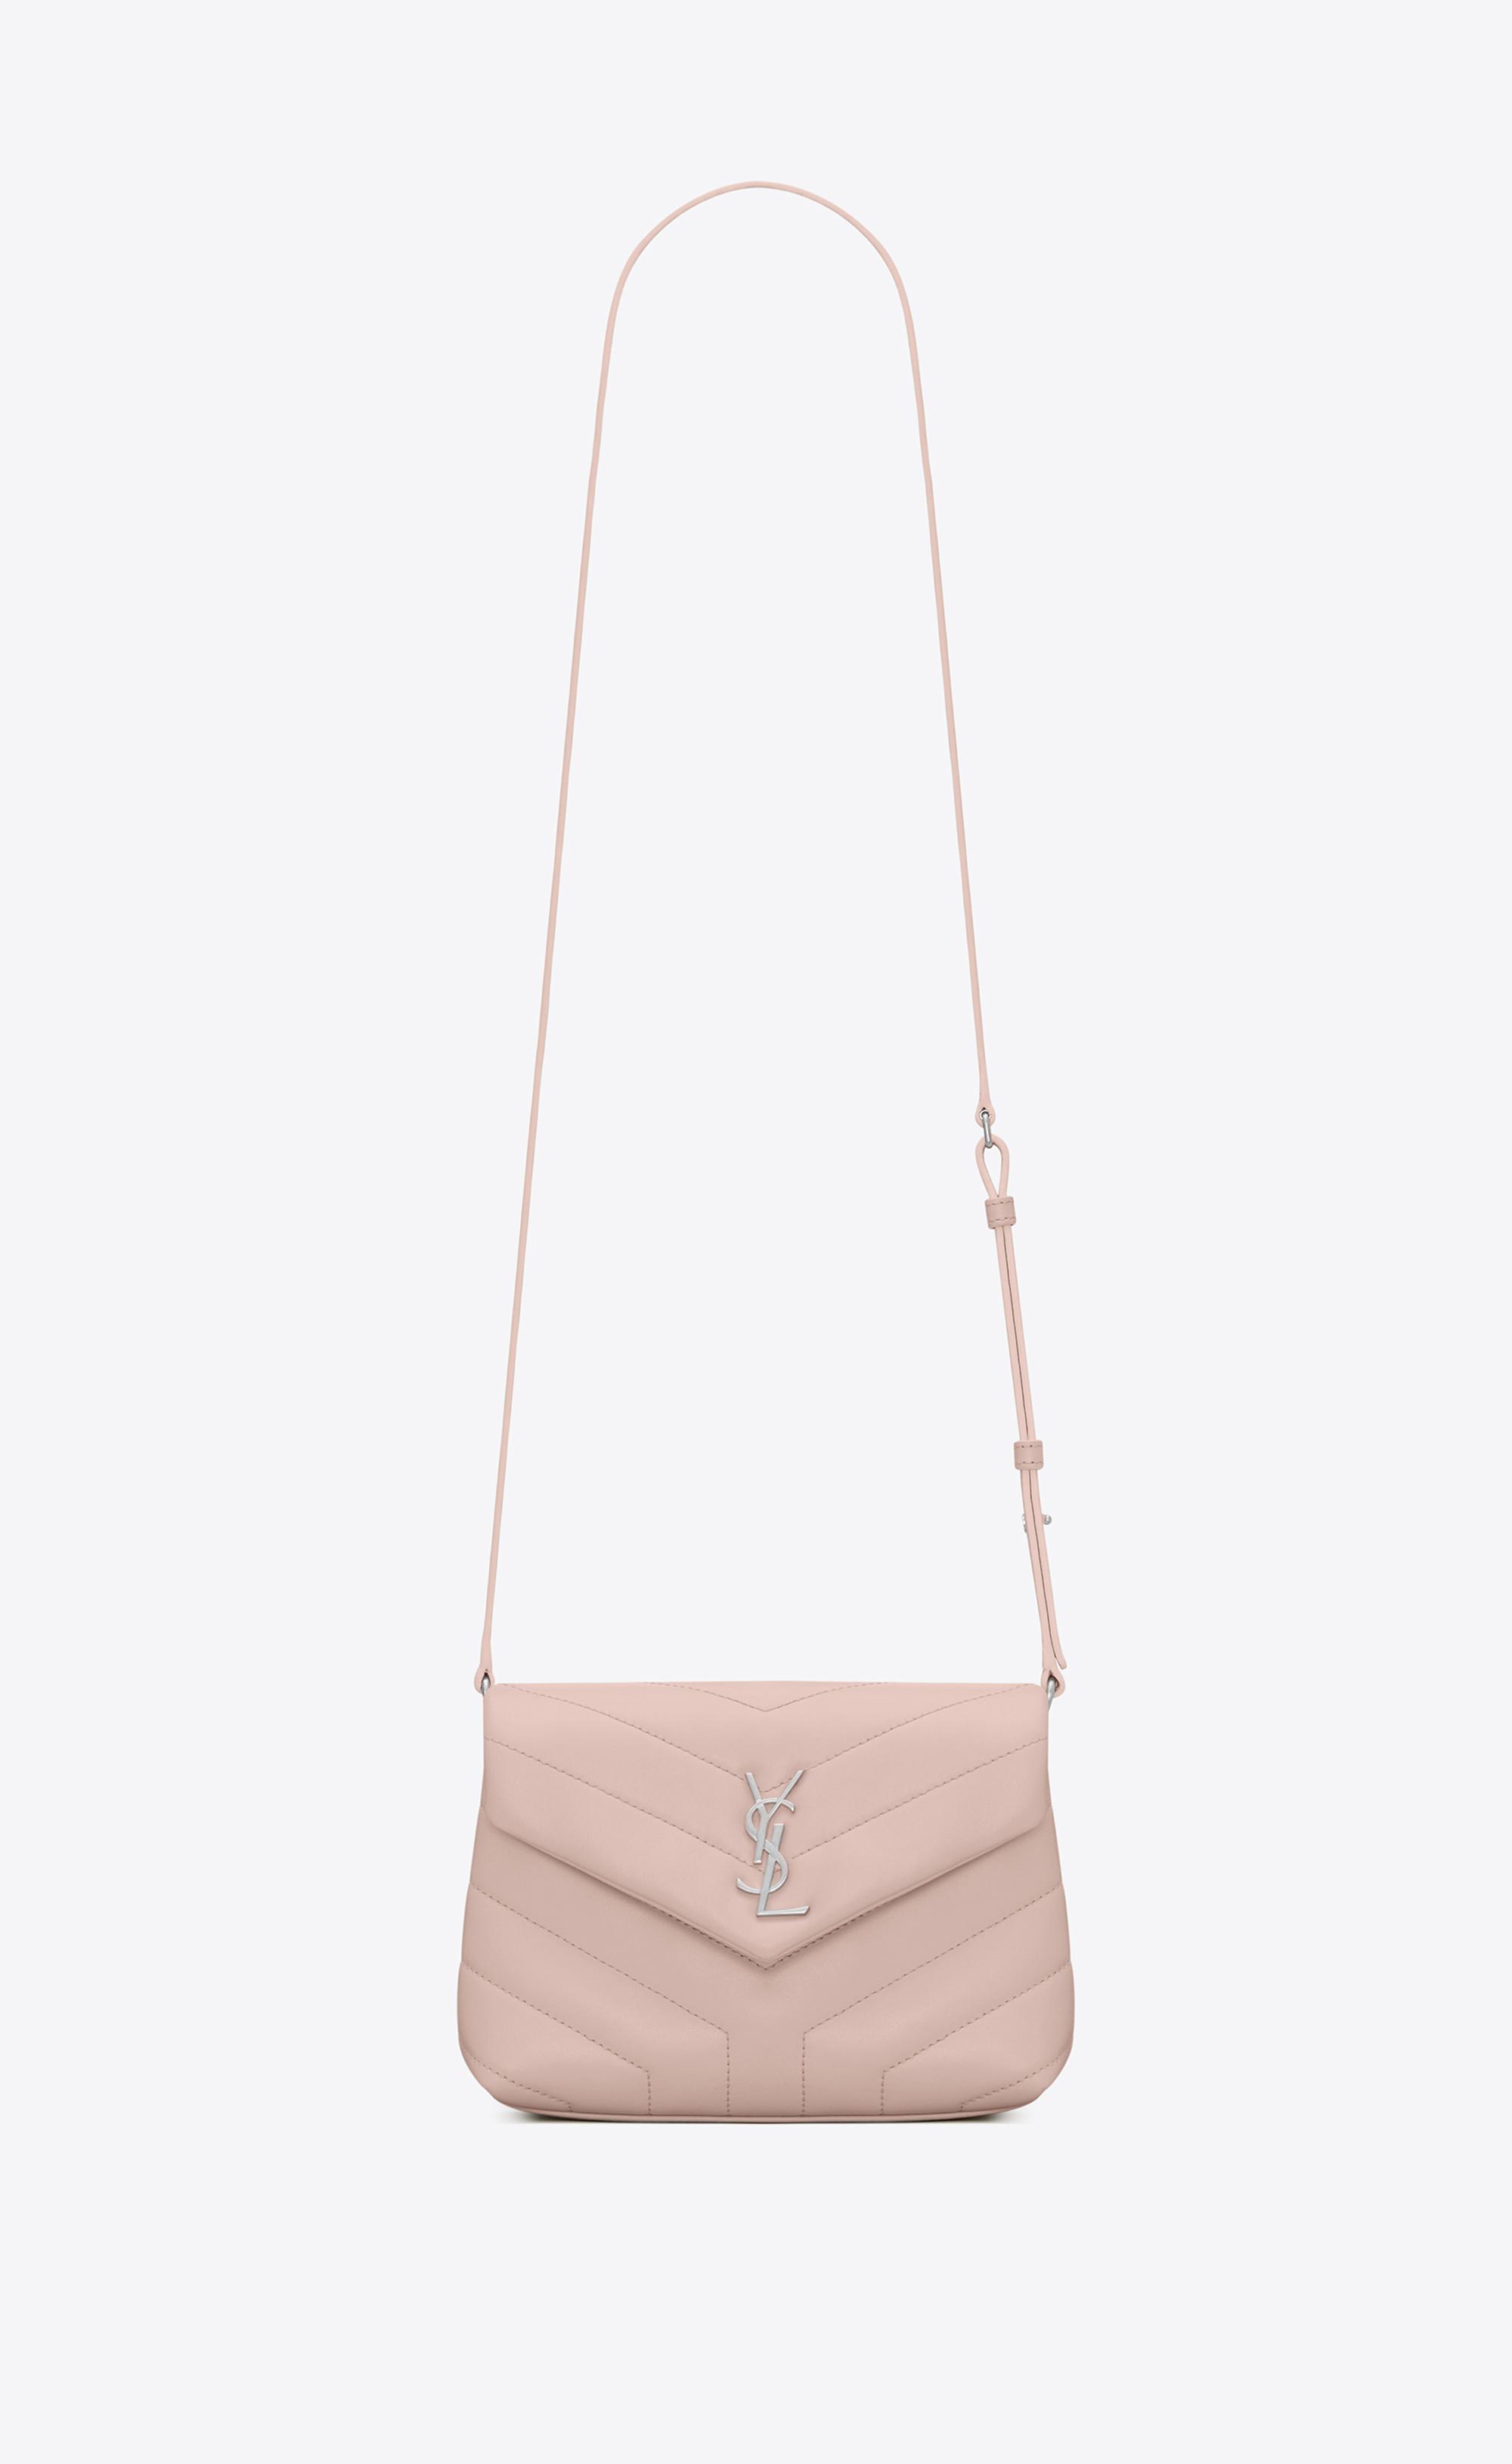 Saint Laurent Toy Loulou Strap Bag in Pink